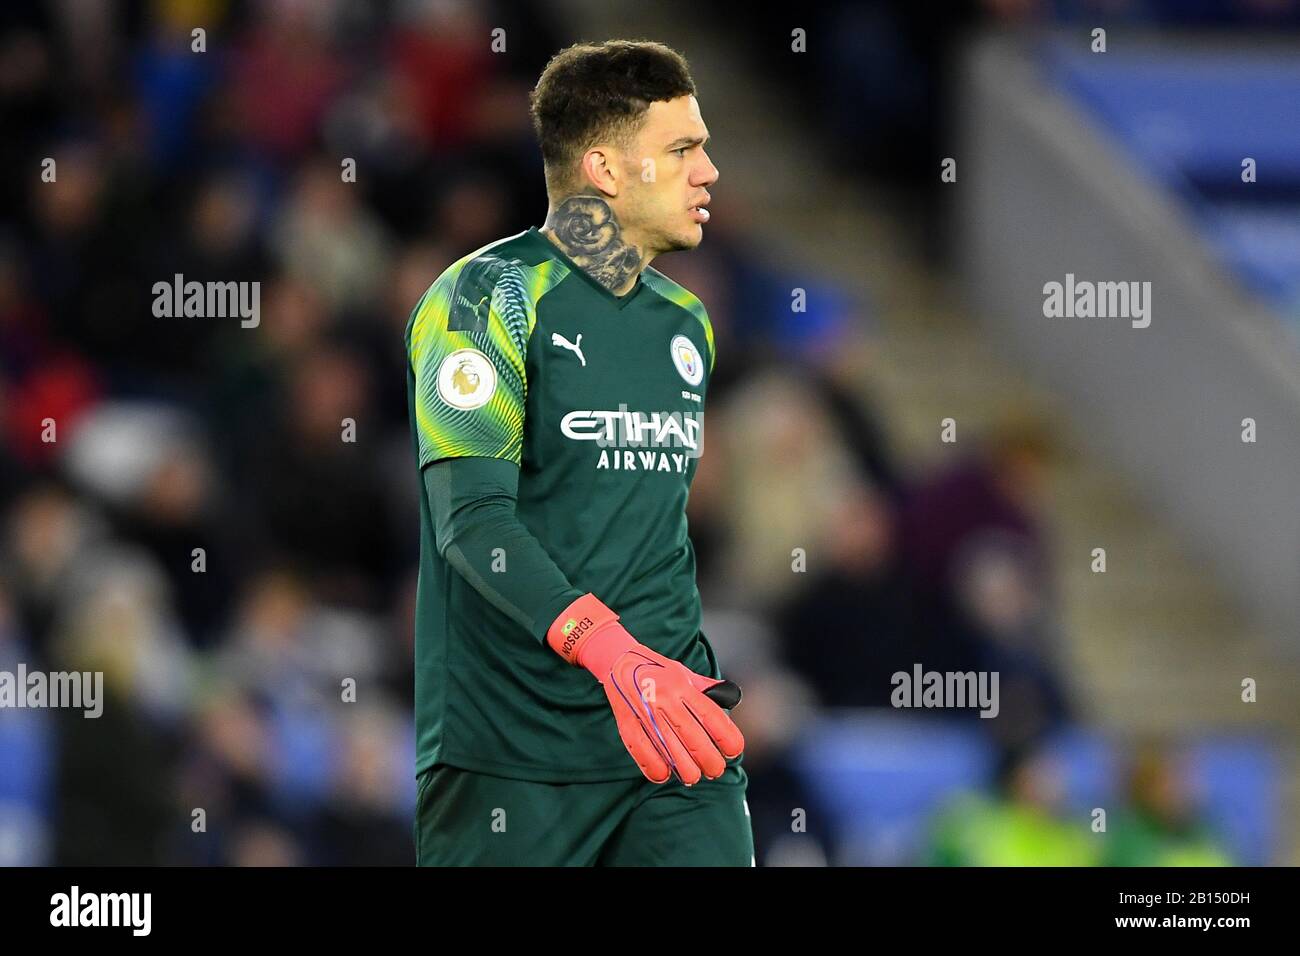 LEICESTER, ENGLAND - FEBRUARY 22ND Ederson (31) of Manchester City during the Premier League match between Leicester City and Manchester City at the King Power Stadium, Leicester on Saturday 22nd February 2020. (Credit: Jon Hobley | MI News) Photograph may only be used for newspaper and/or magazine editorial purposes, license required for commercial use Credit: MI News & Sport /Alamy Live News Stock Photo